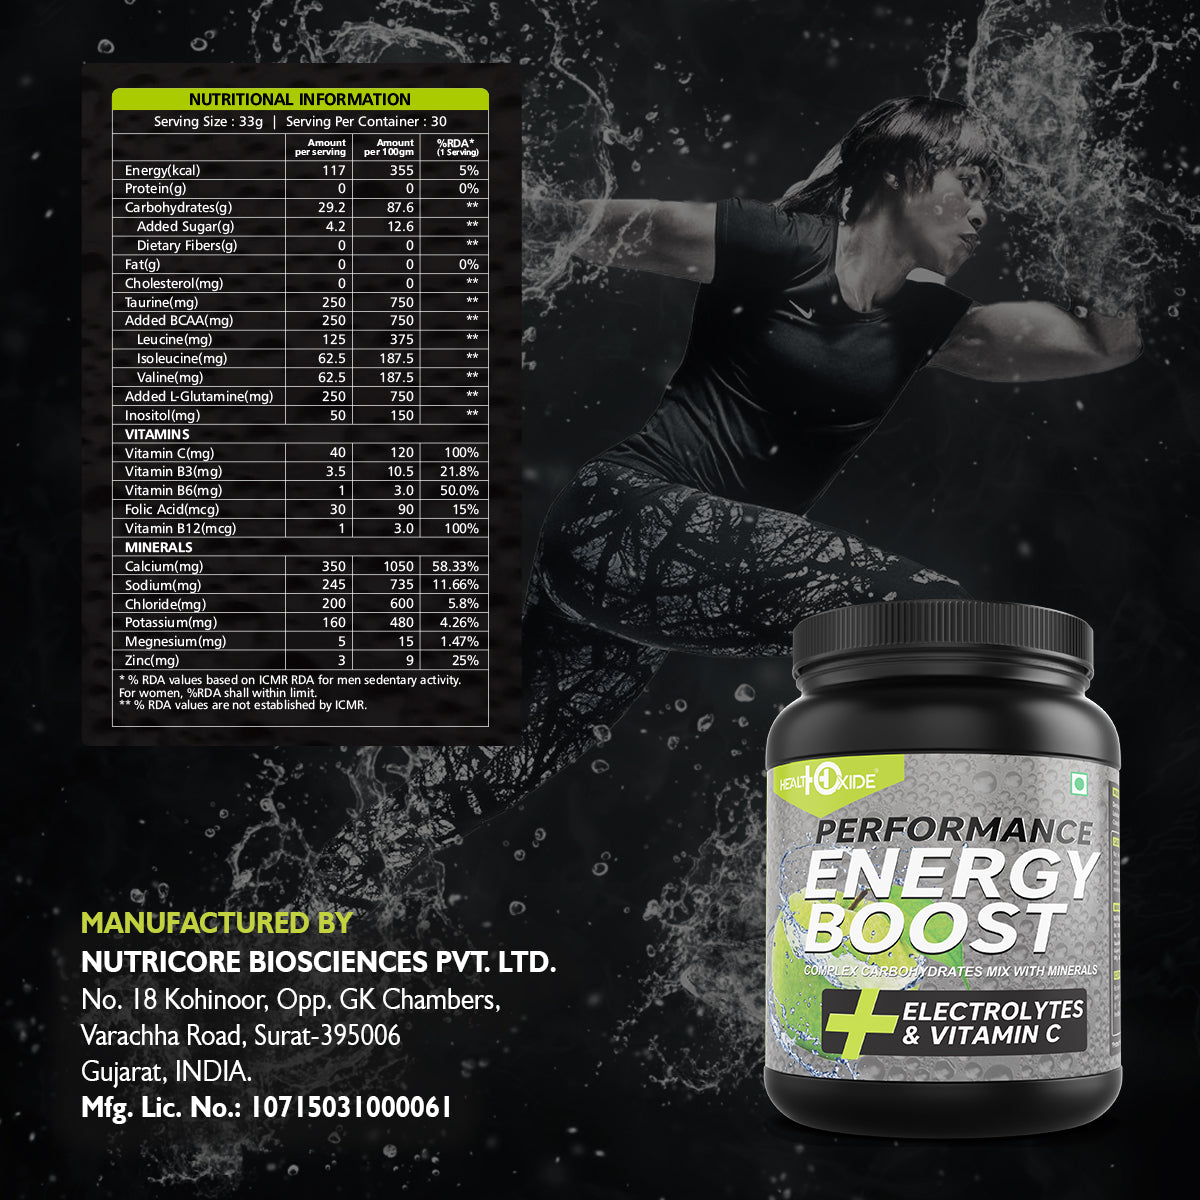 Energy Boost For Extra Power (Electrolytes & Vitamin C)- 1Kg